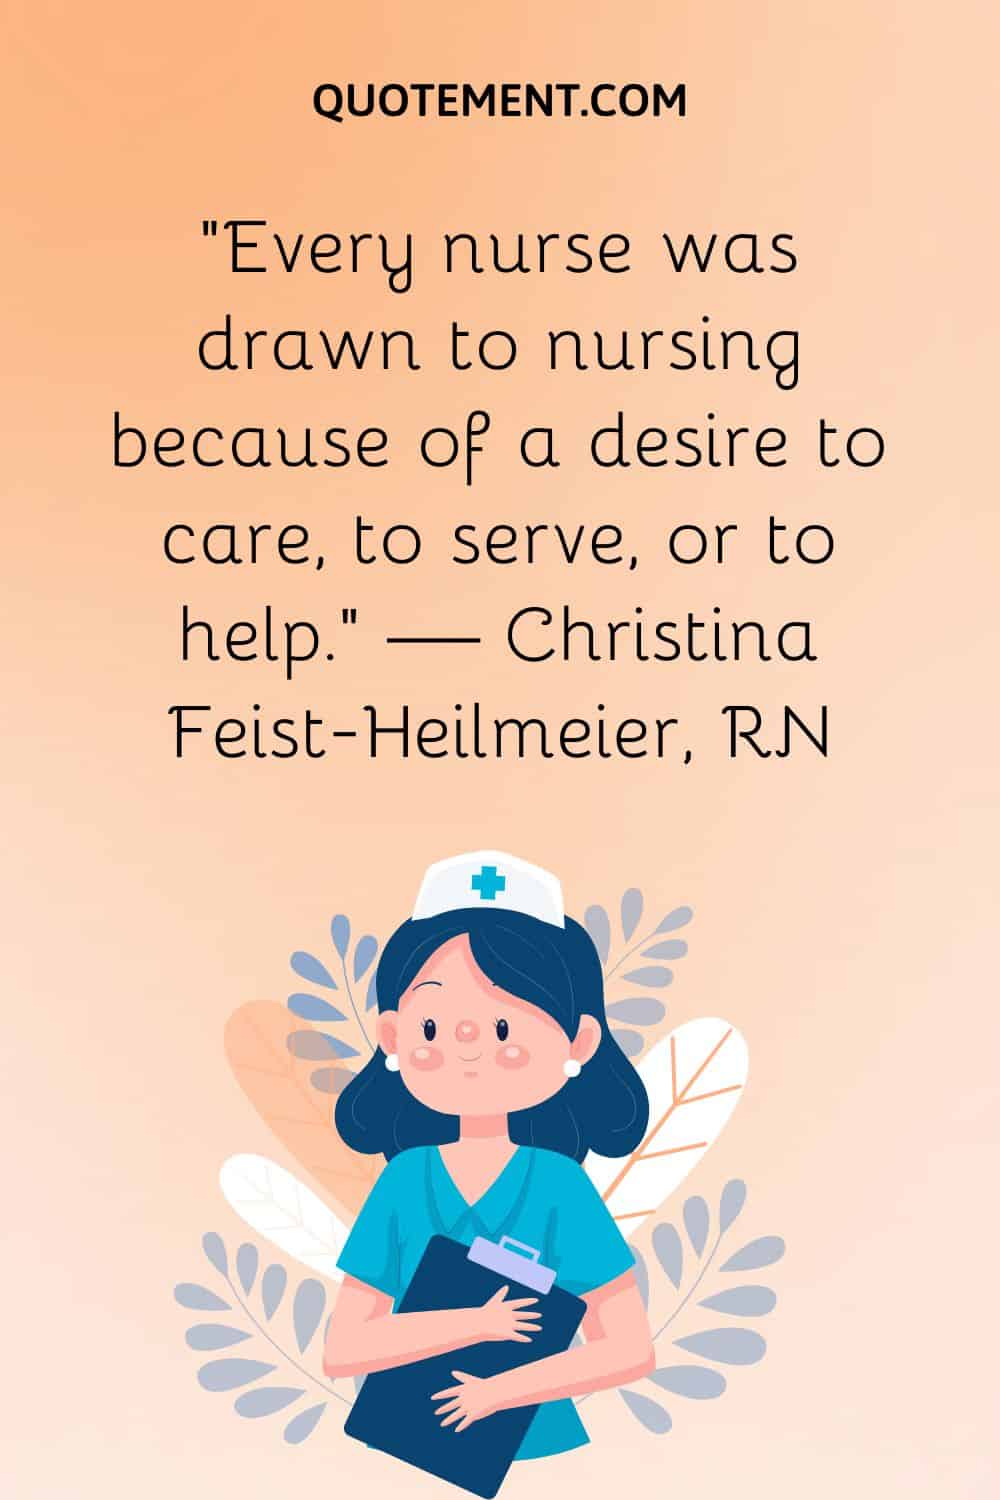 “Every nurse was drawn to nursing because of a desire to care, to serve, or to help.” — Christina Feist-Heilmeier, RN